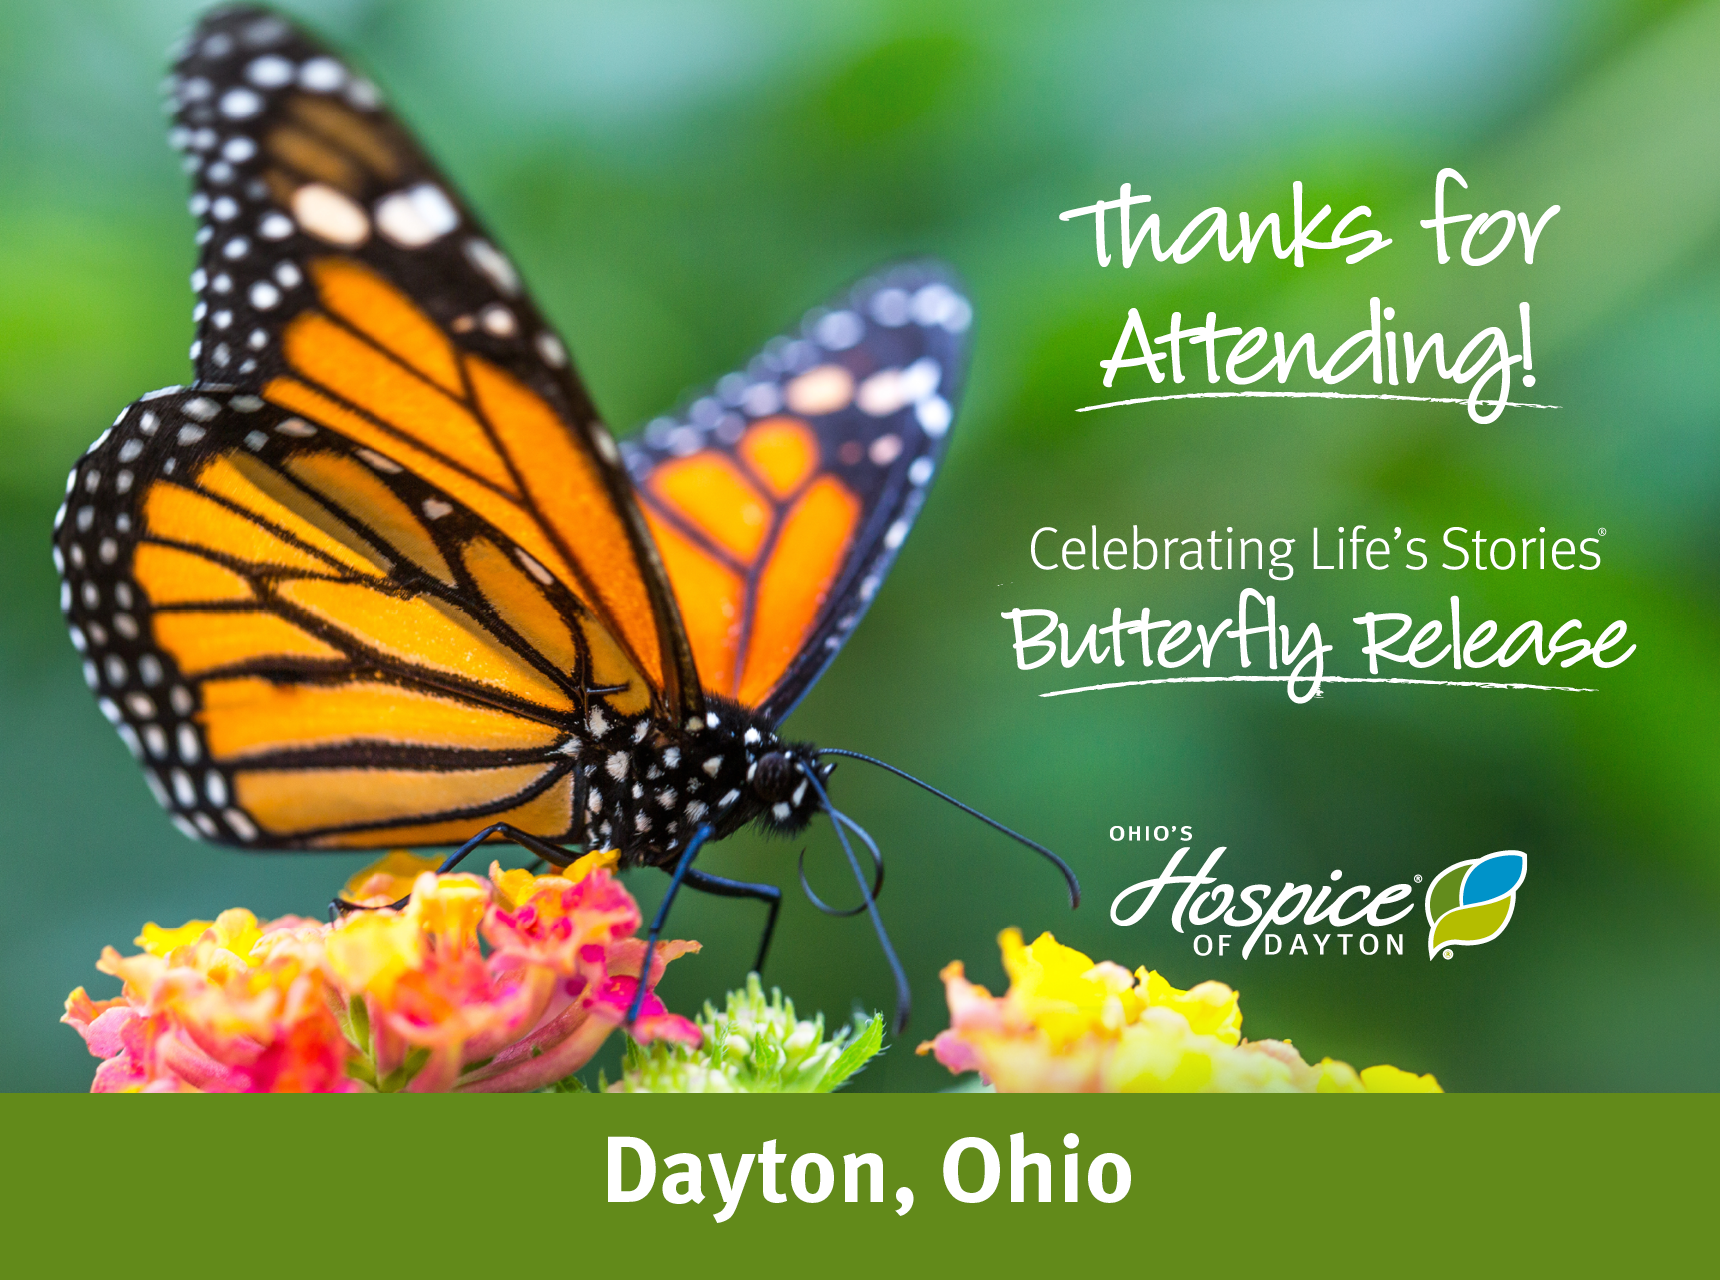 Thanks for attending! Butterfly Release 2023. Ohio's Hospice of Dayton